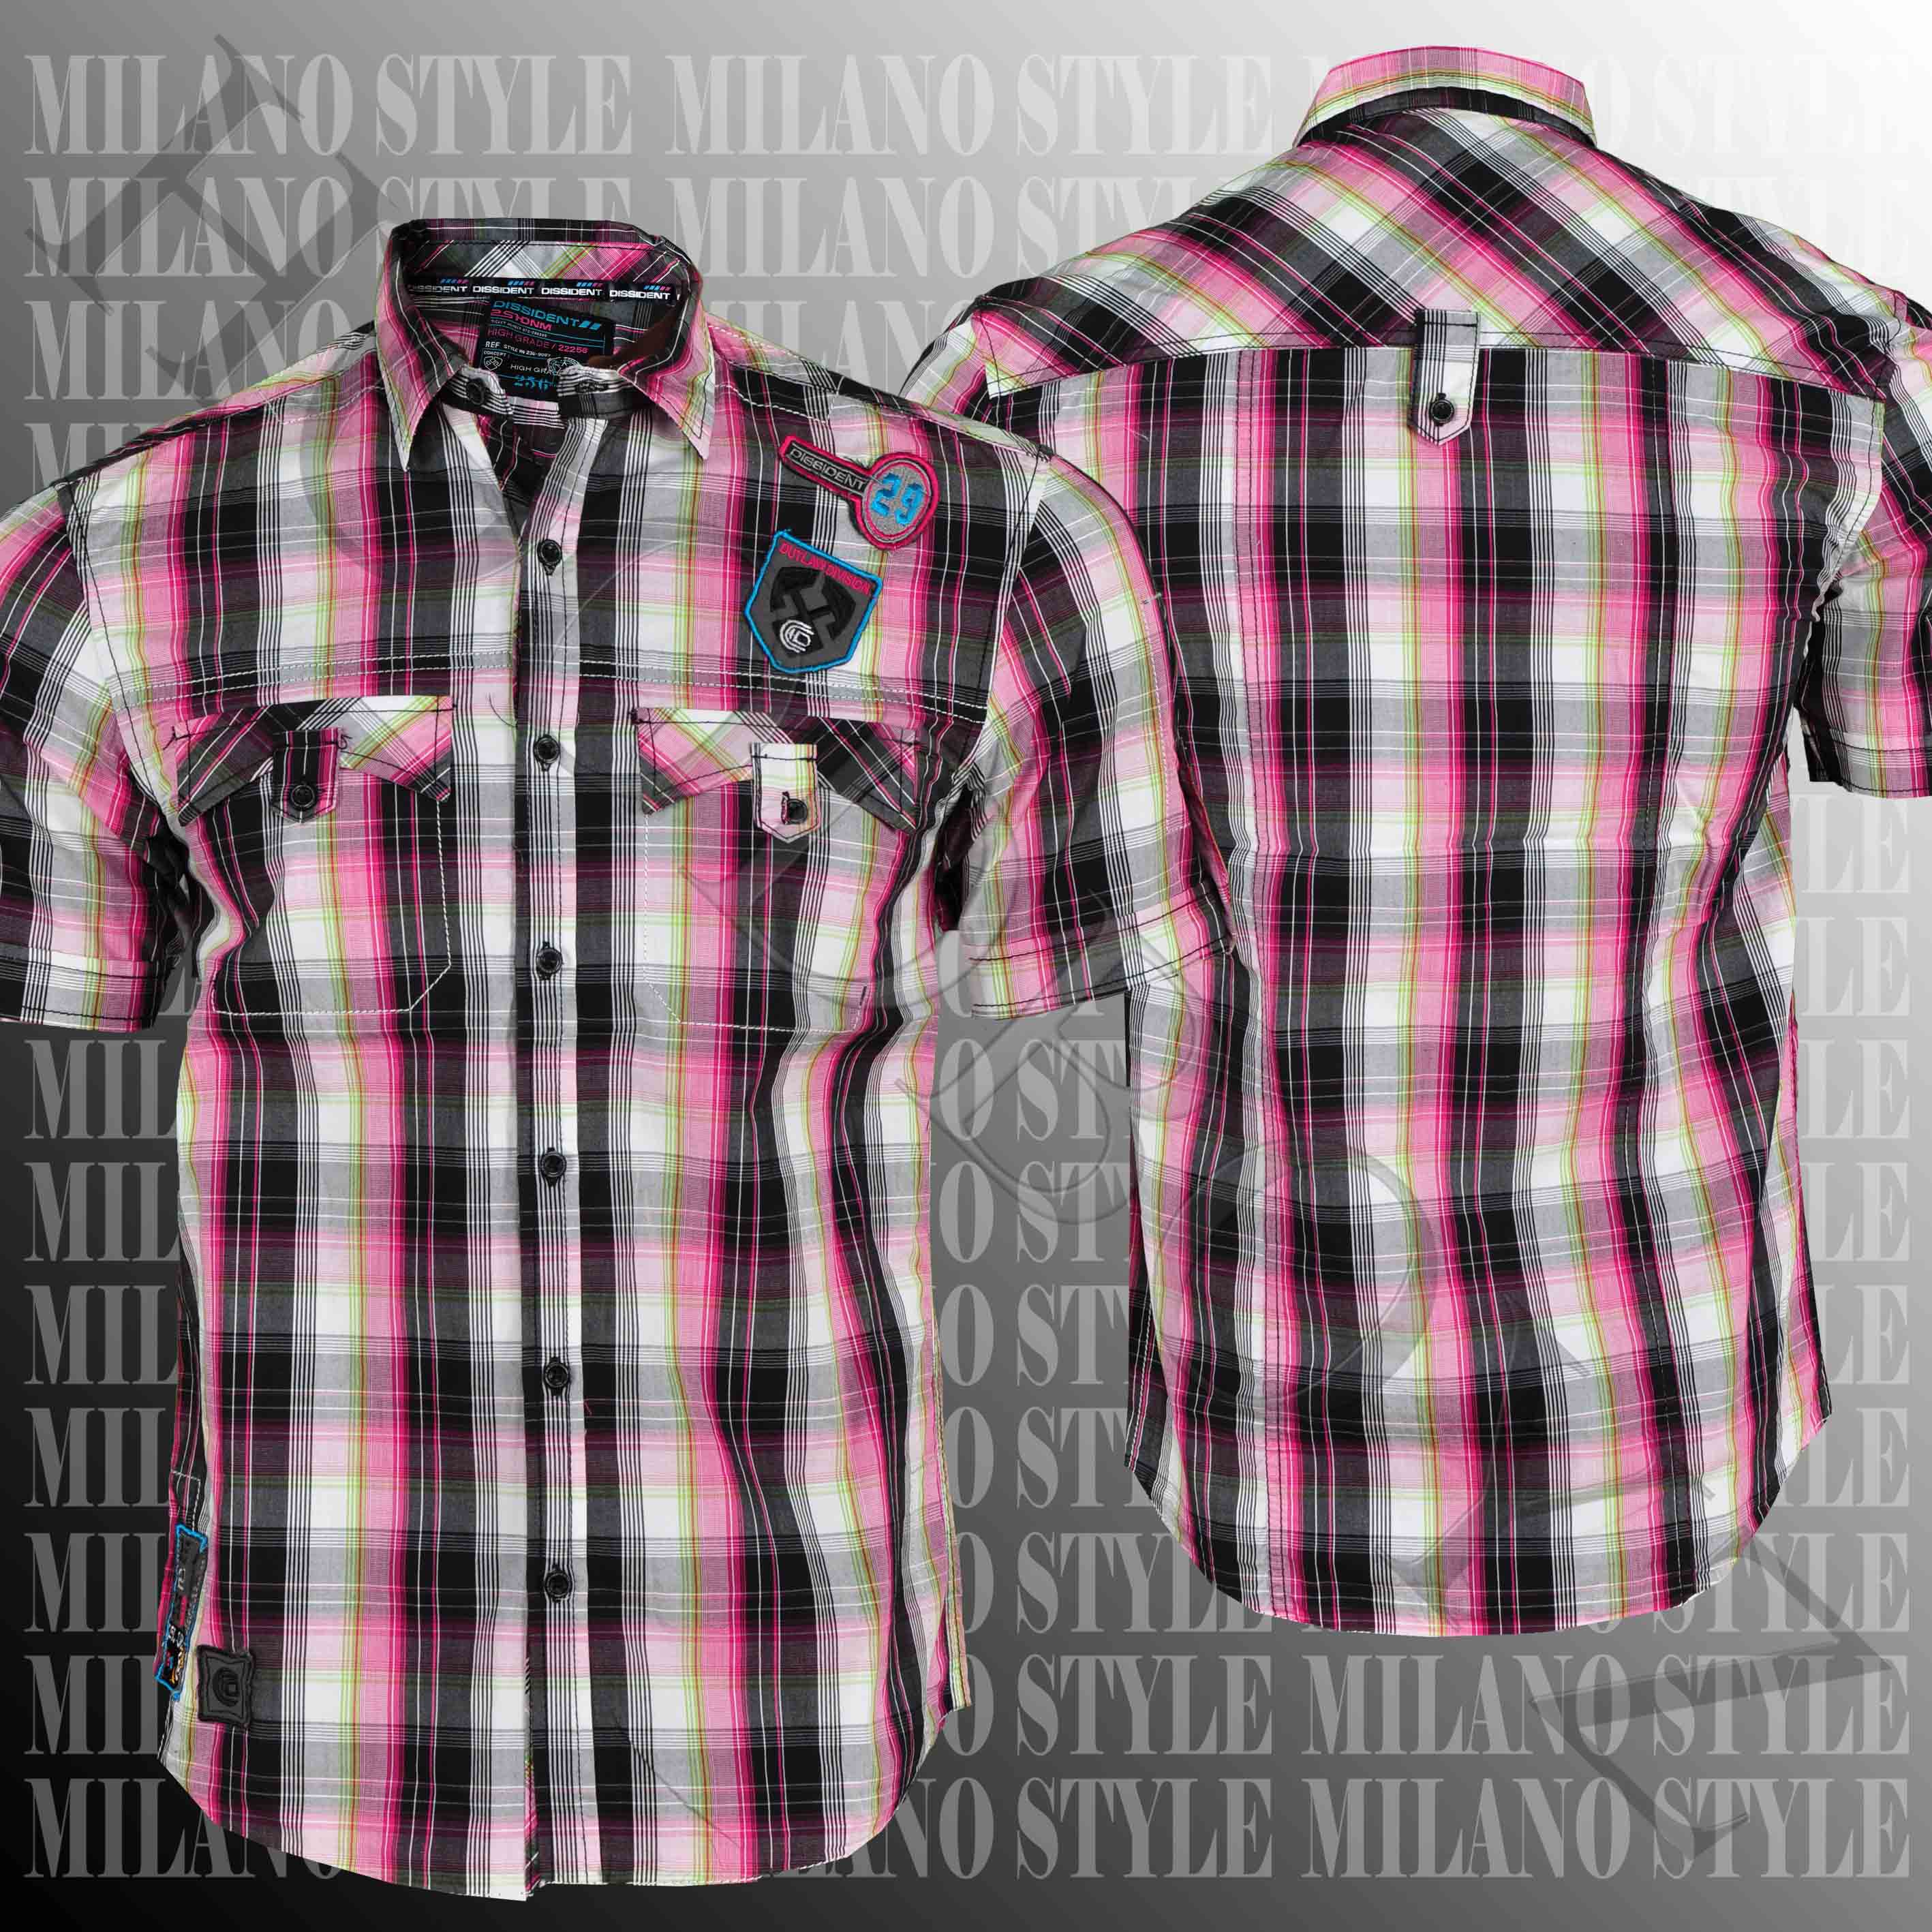 Foto Milano Style Dissident Camisas Gris Oscuro Rosa